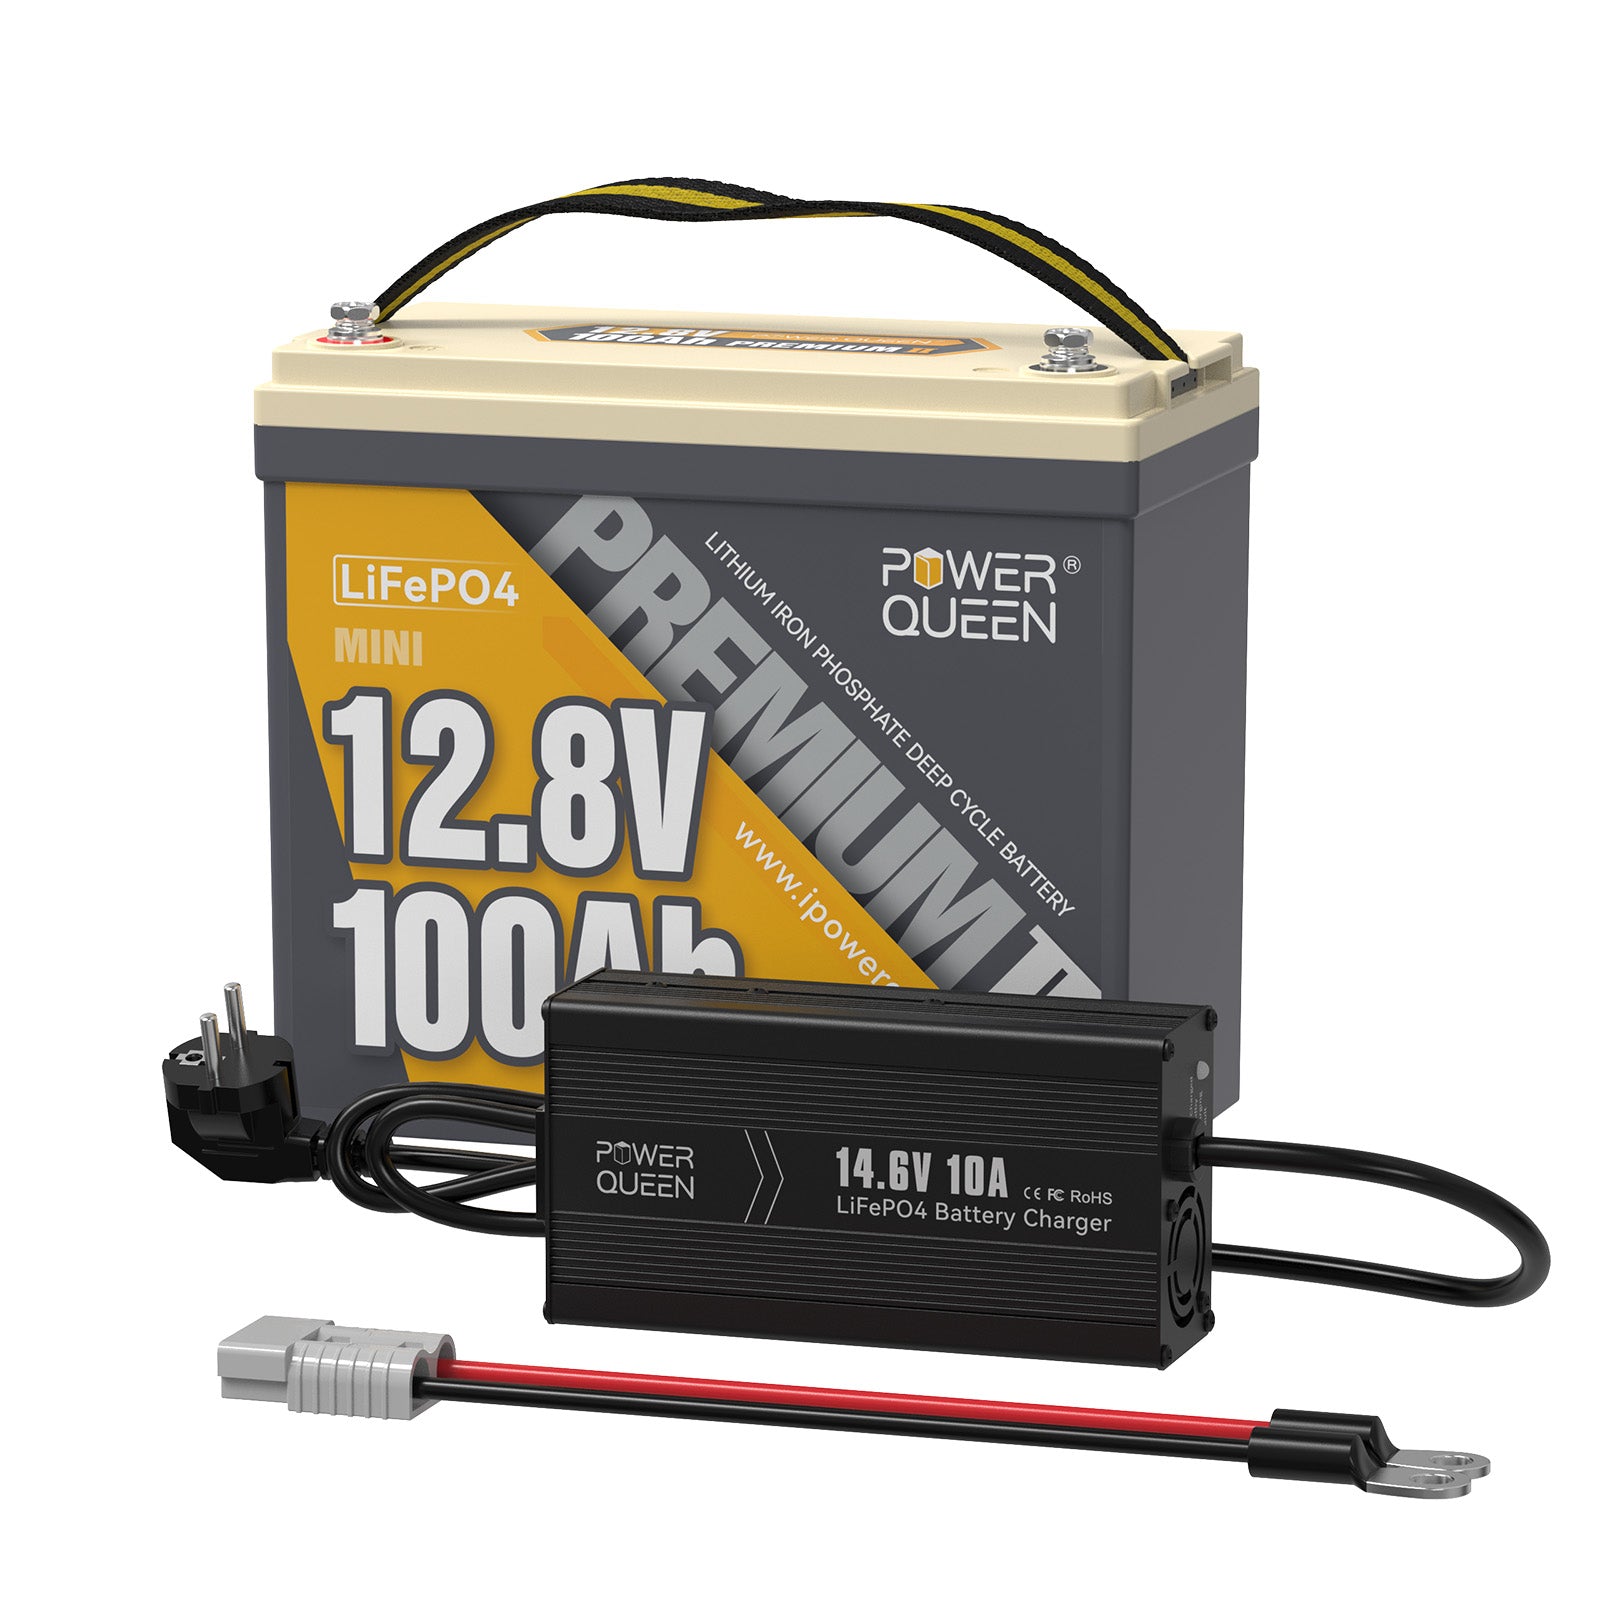 Power Queen 12V 100Ah Mini LiFePO4 Battery, Integrated 100A BMS